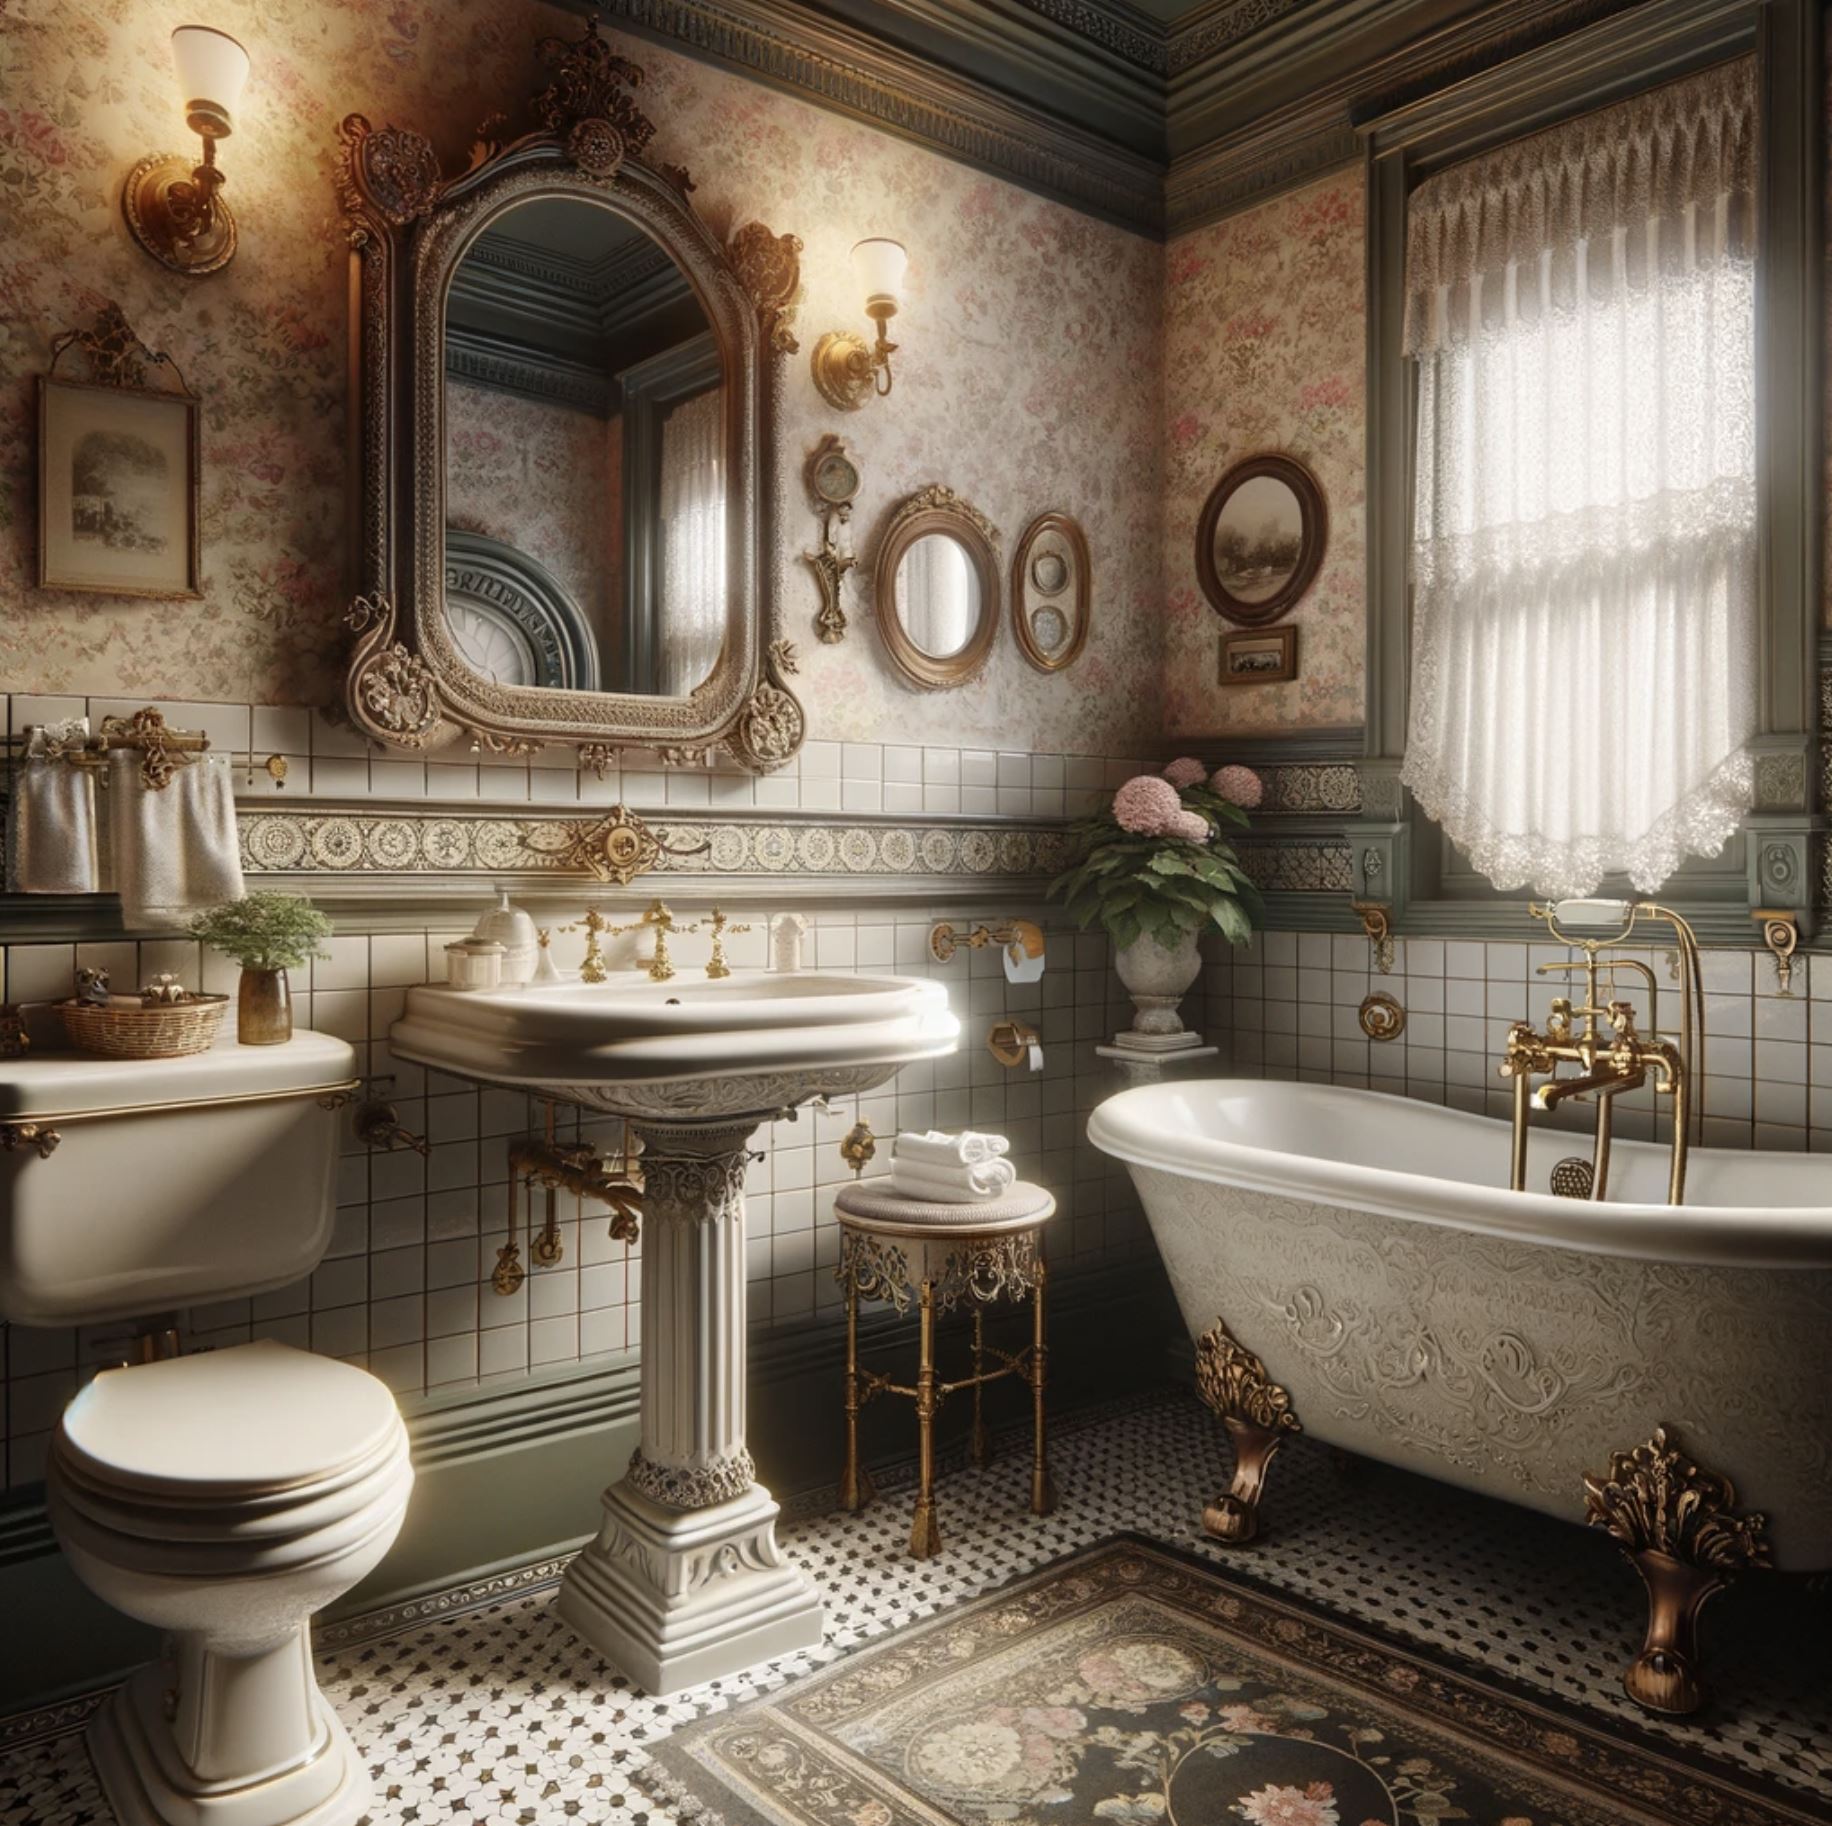 An exquisite Victorian bathroom with dual clawfoot tubs, gilded fixtures, and a stately vanity, reminiscent of a luxurious spa from the past.